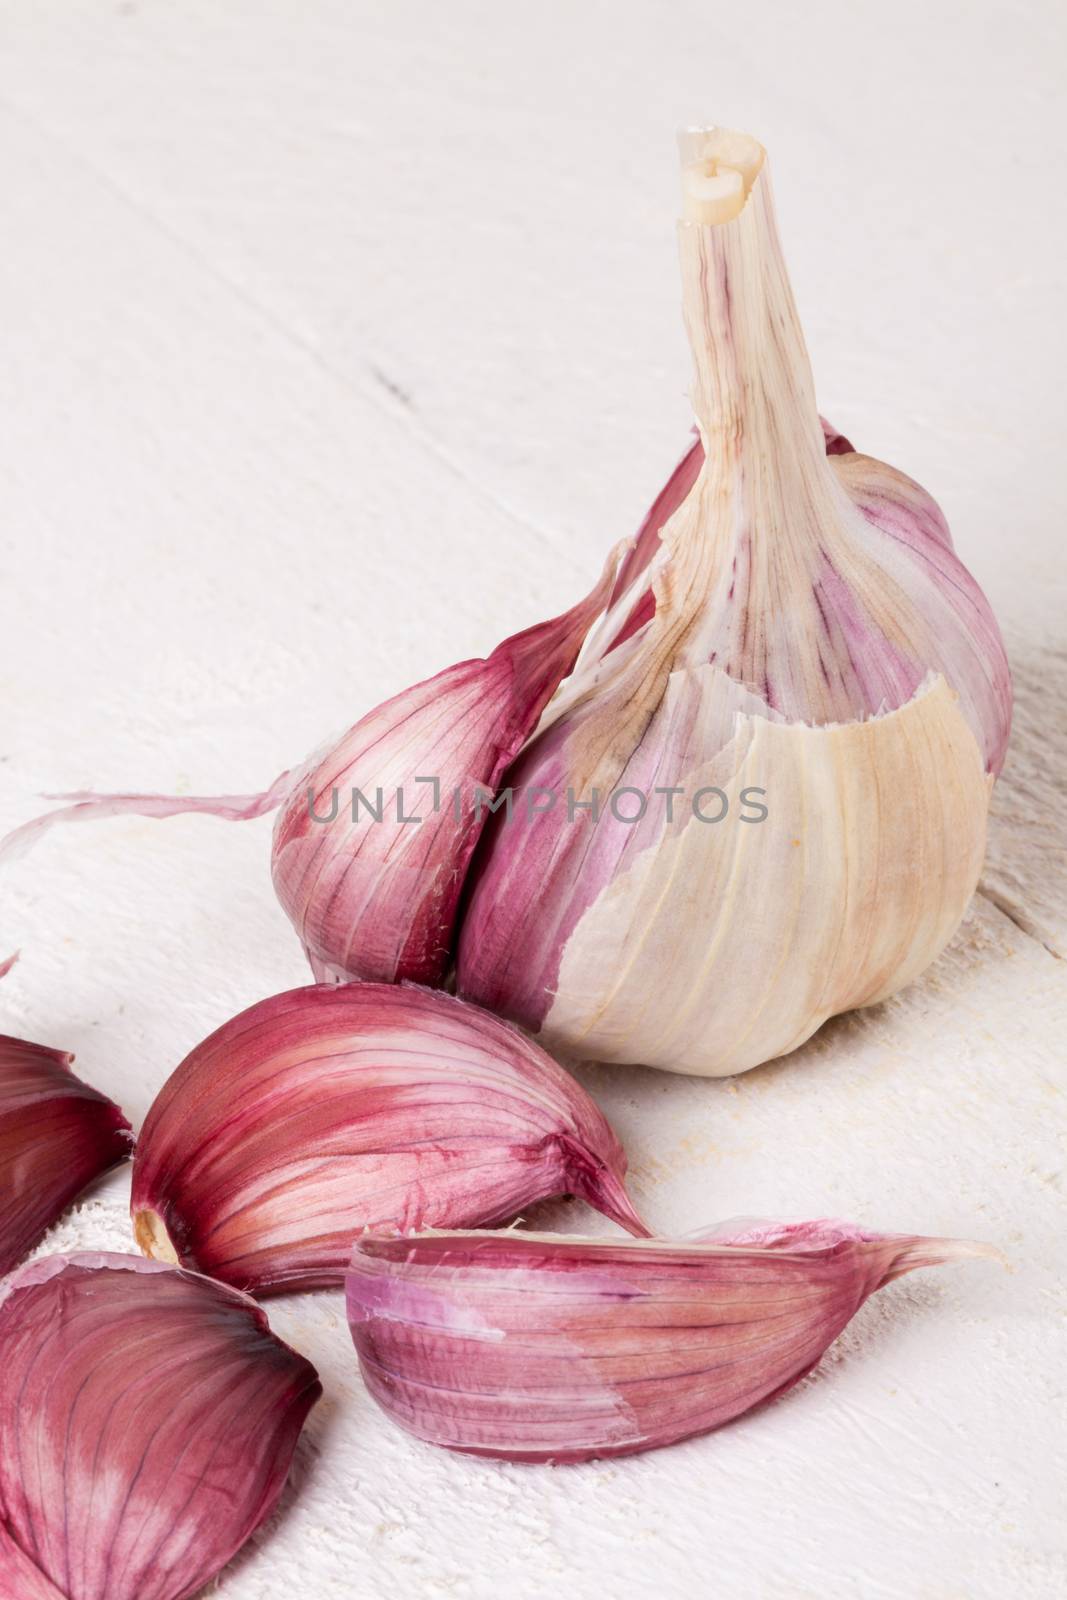 Fresh uncooked garlic bulb with loose cloves with one clove cut through lengthwise to show the texture, on a white background